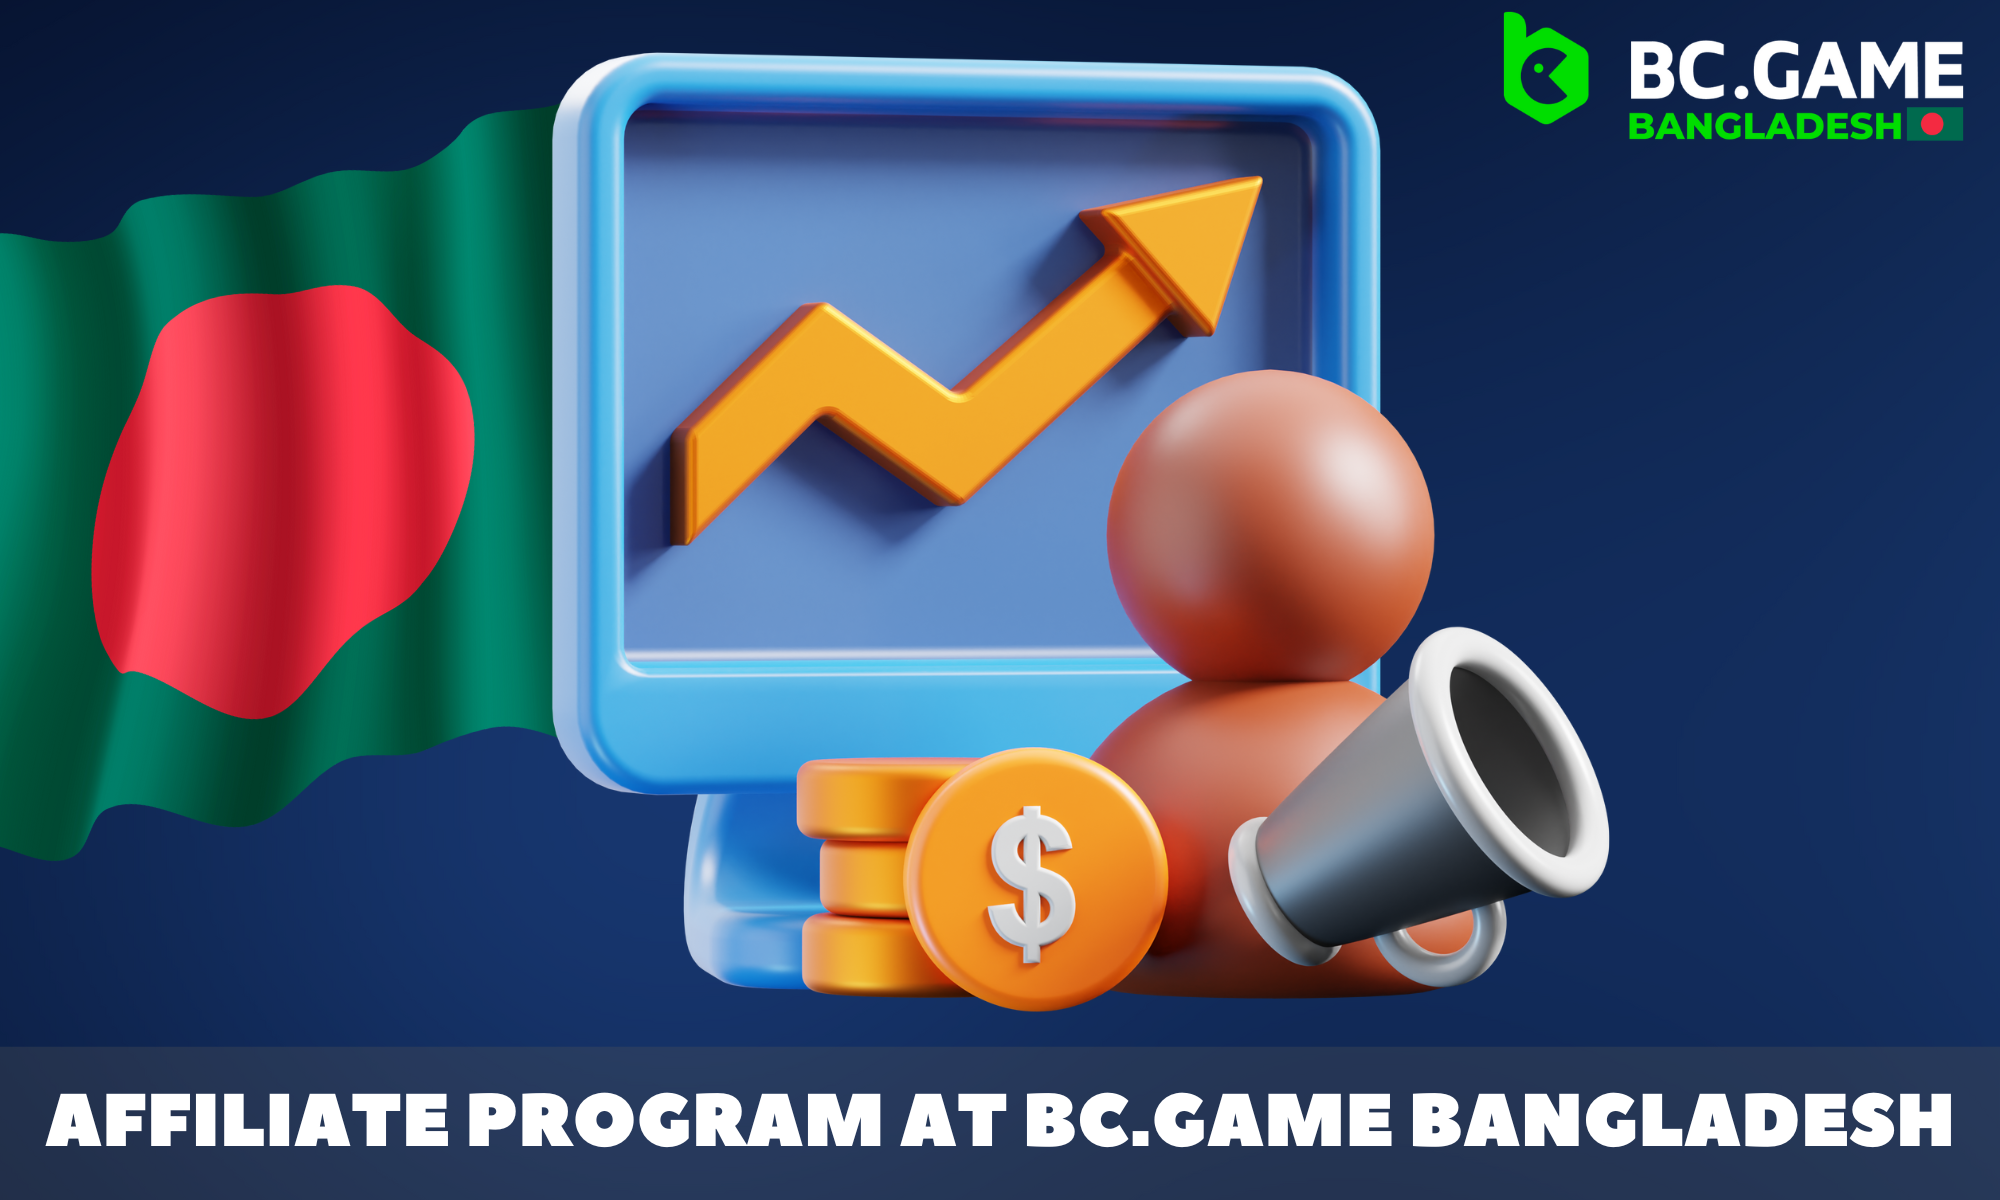 BC.GAME Bangladesh has created an affiliate program that will help you make a profit